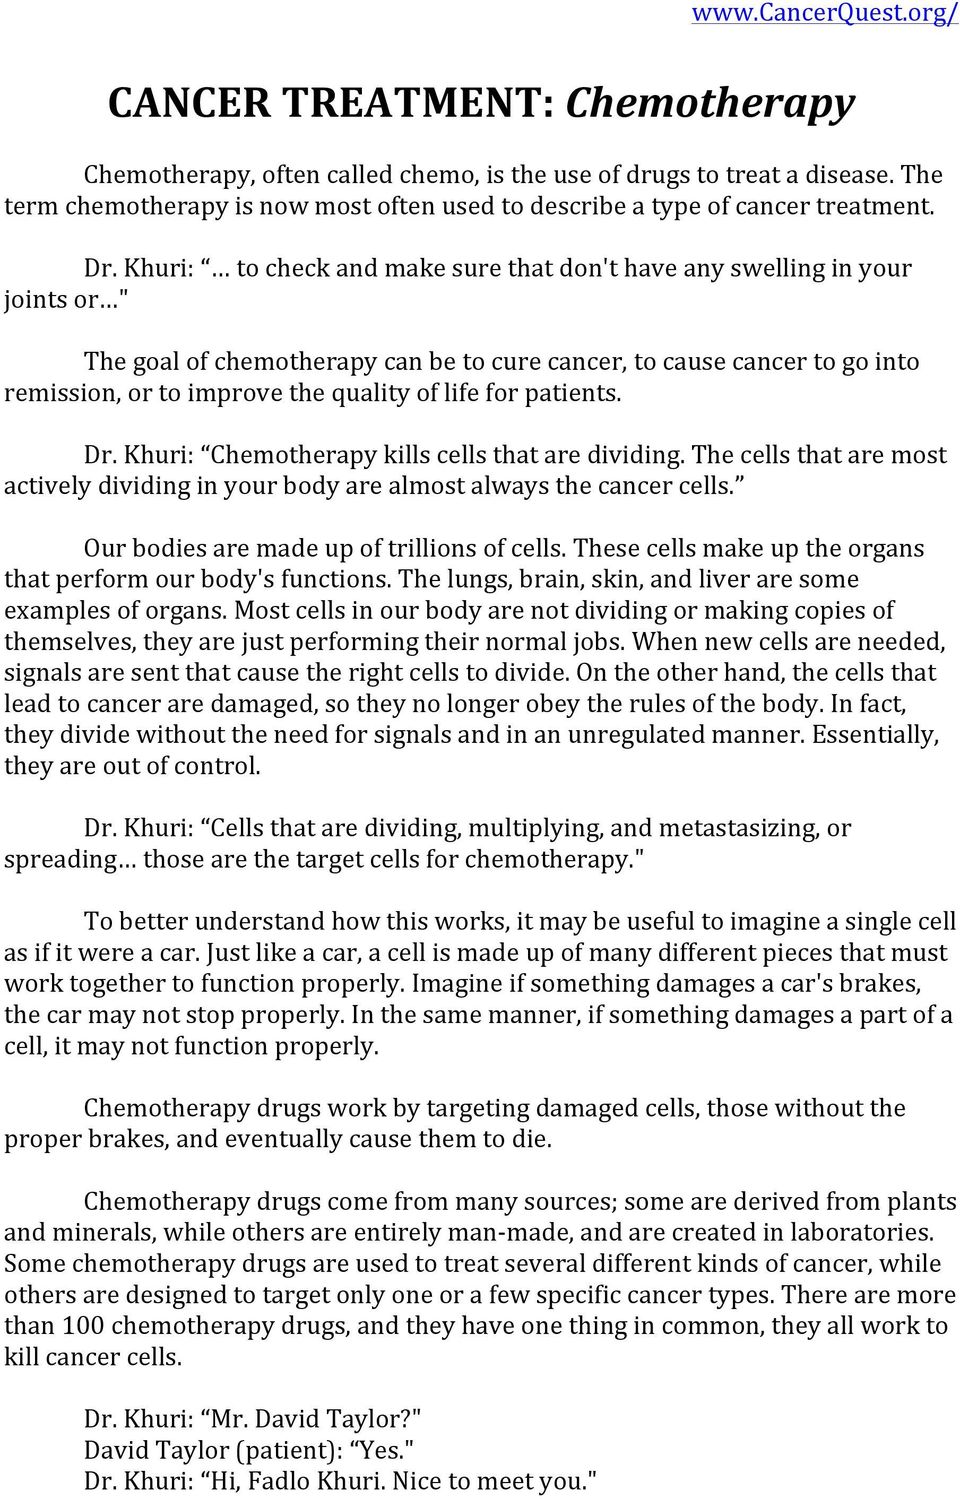 for patients. Dr. Khuri: Chemotherapy kills cells that are dividing. The cells that are most actively dividing in your body are almost always the cancer cells.